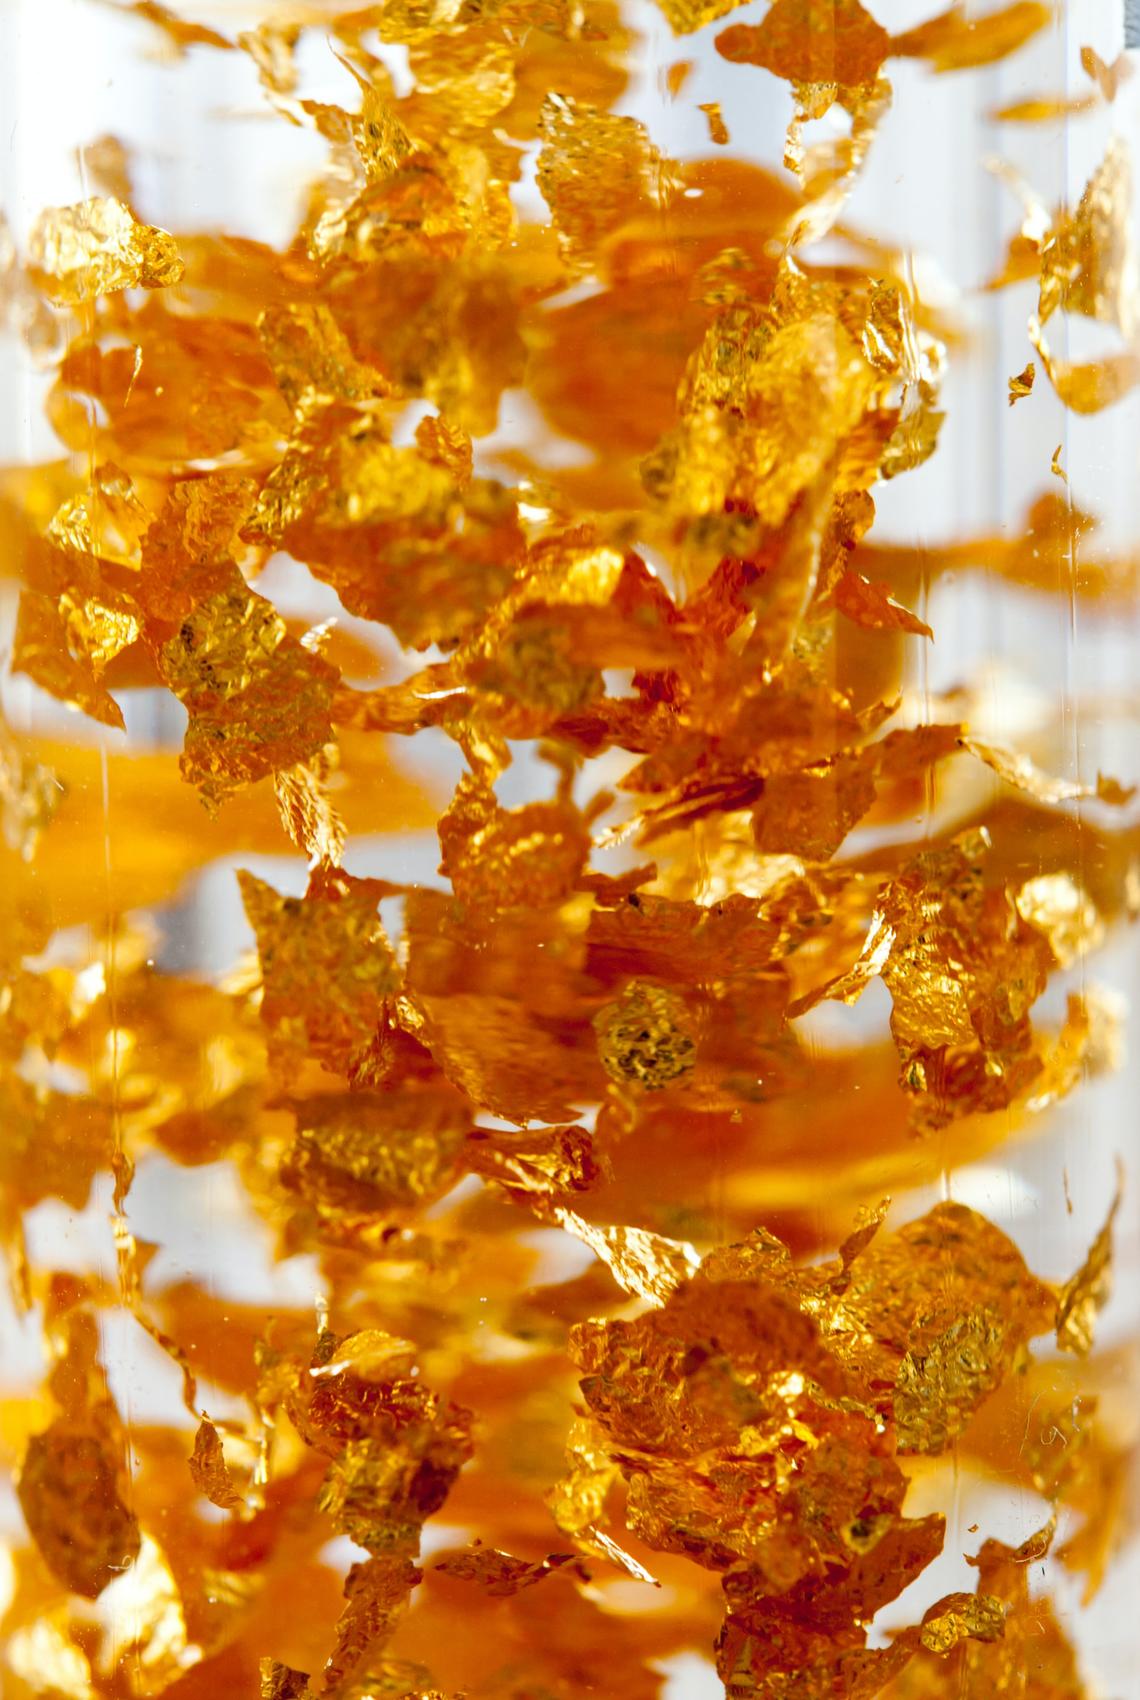 Gold flakes suspended in clear liquid